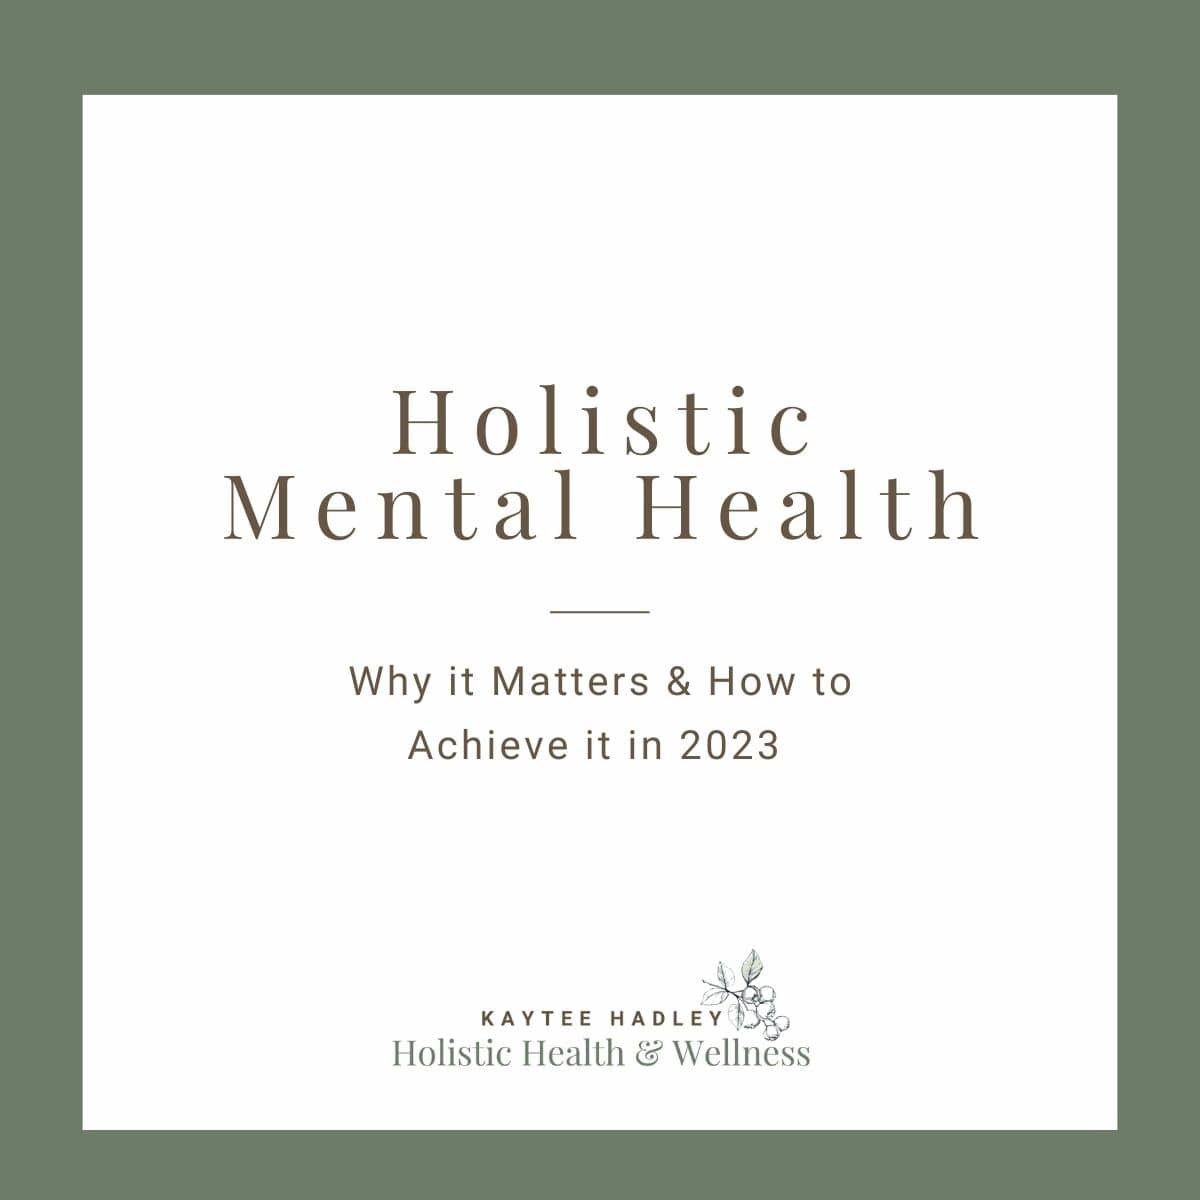 holistic mental health: why it matters and how to achieve is in 2023